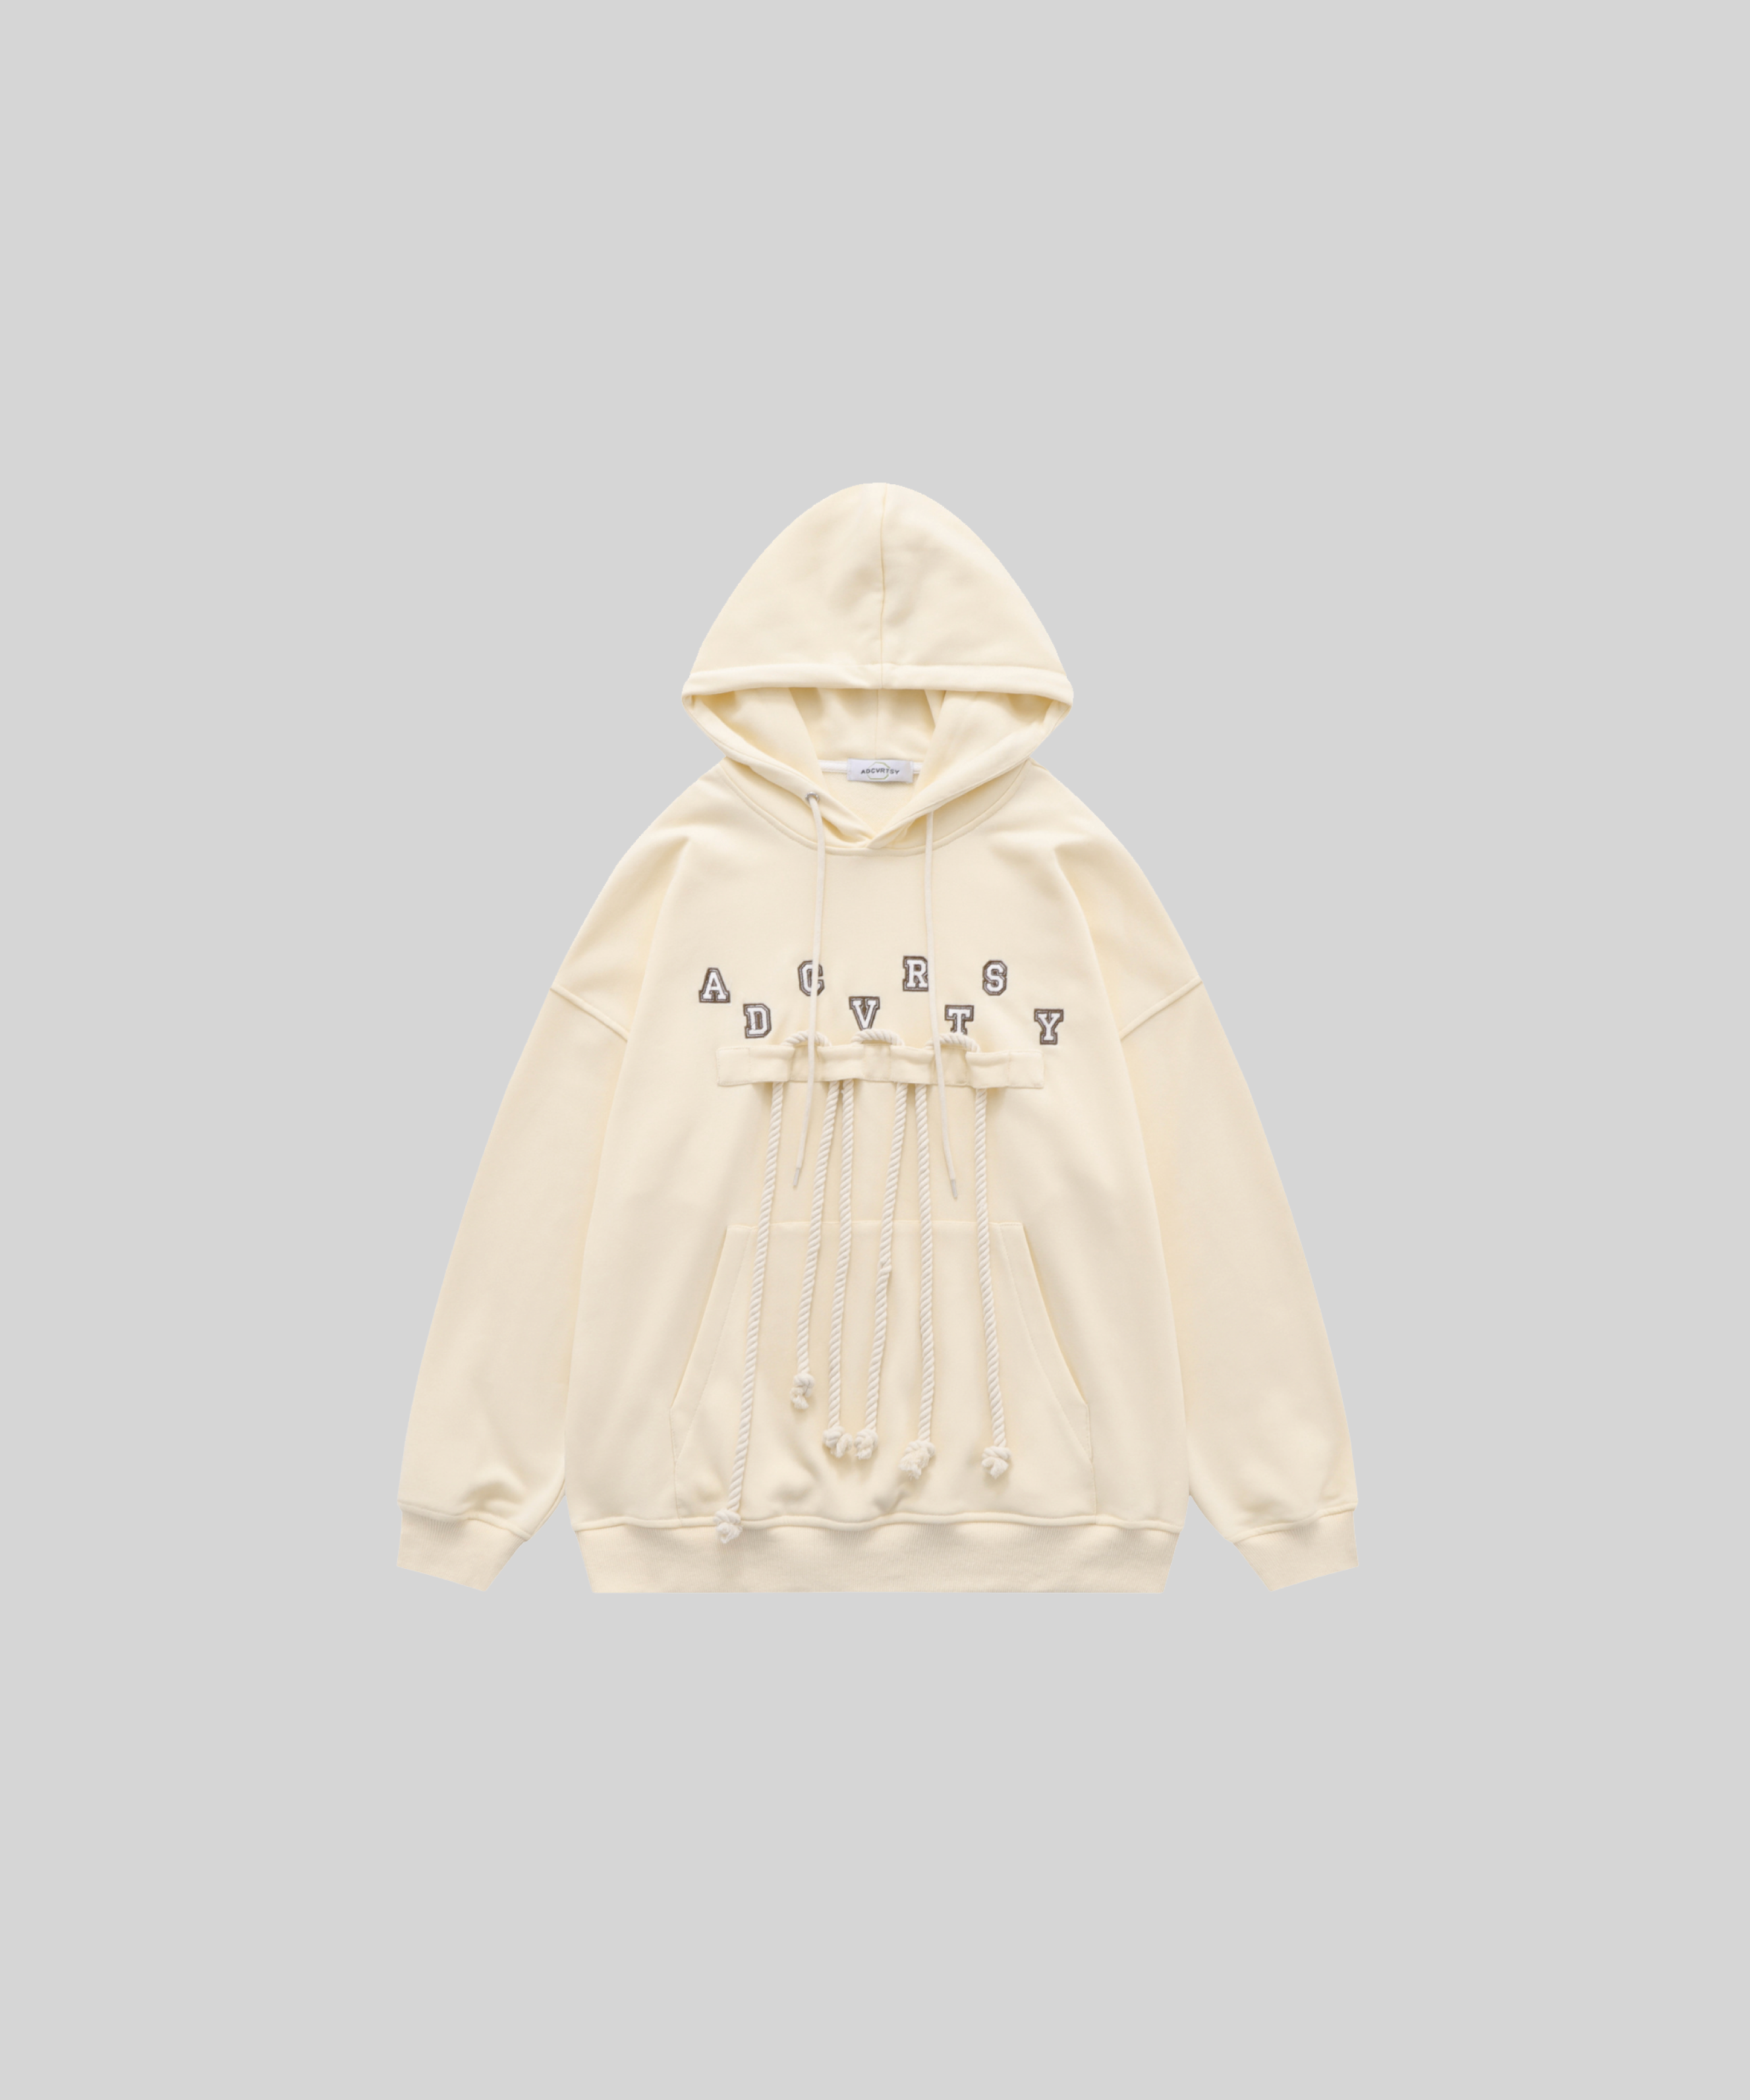 Adcvrtsy・Logo Embroidery Hoodie